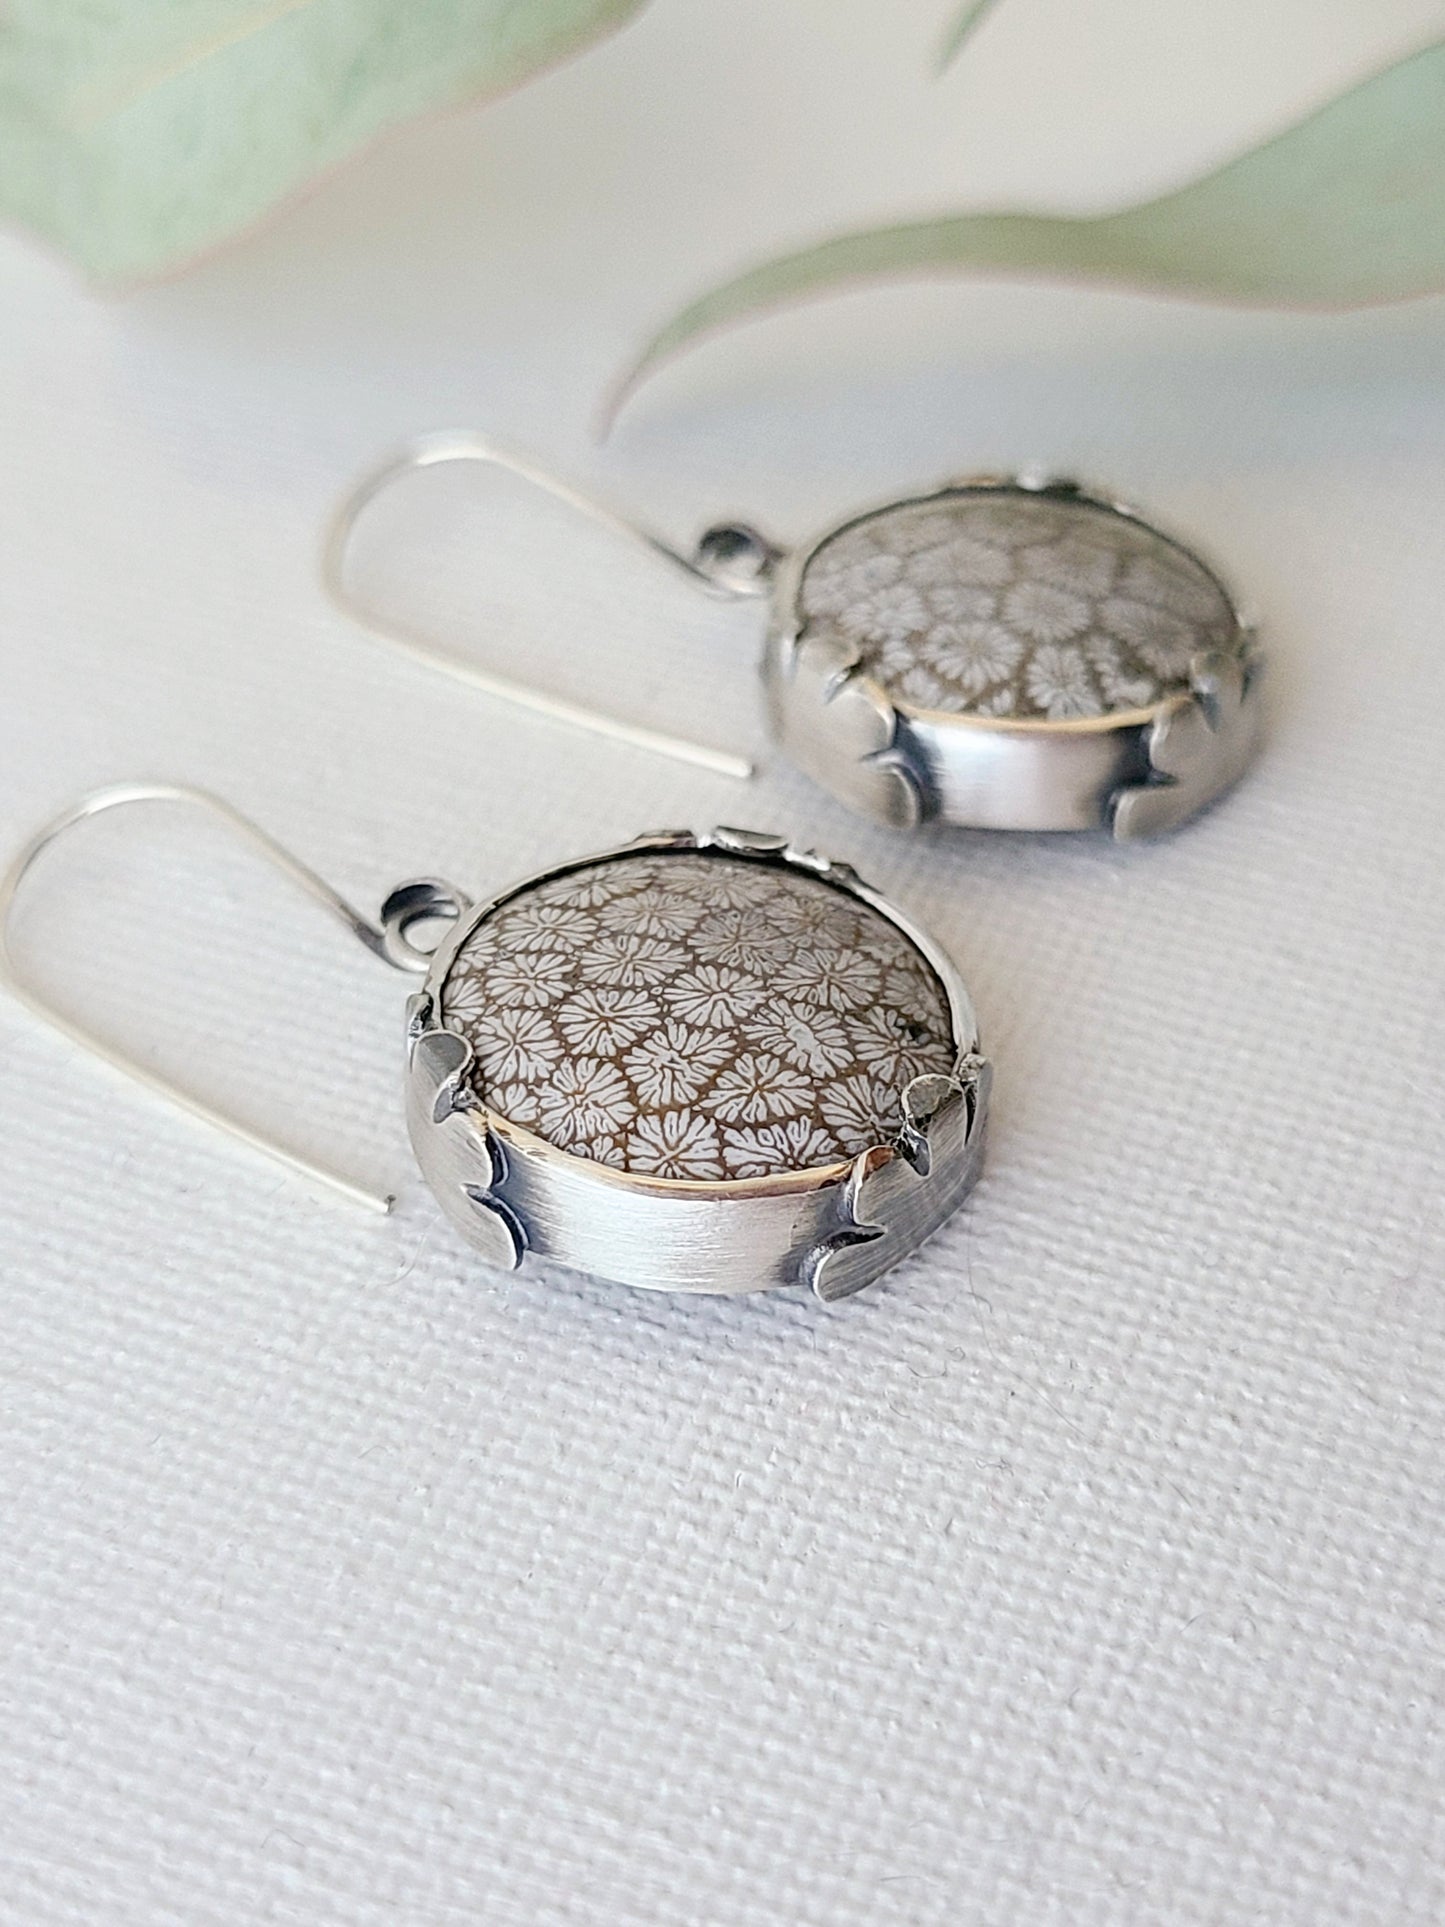 Fossil Flower earrings-Black & White Round Fossilized Coral